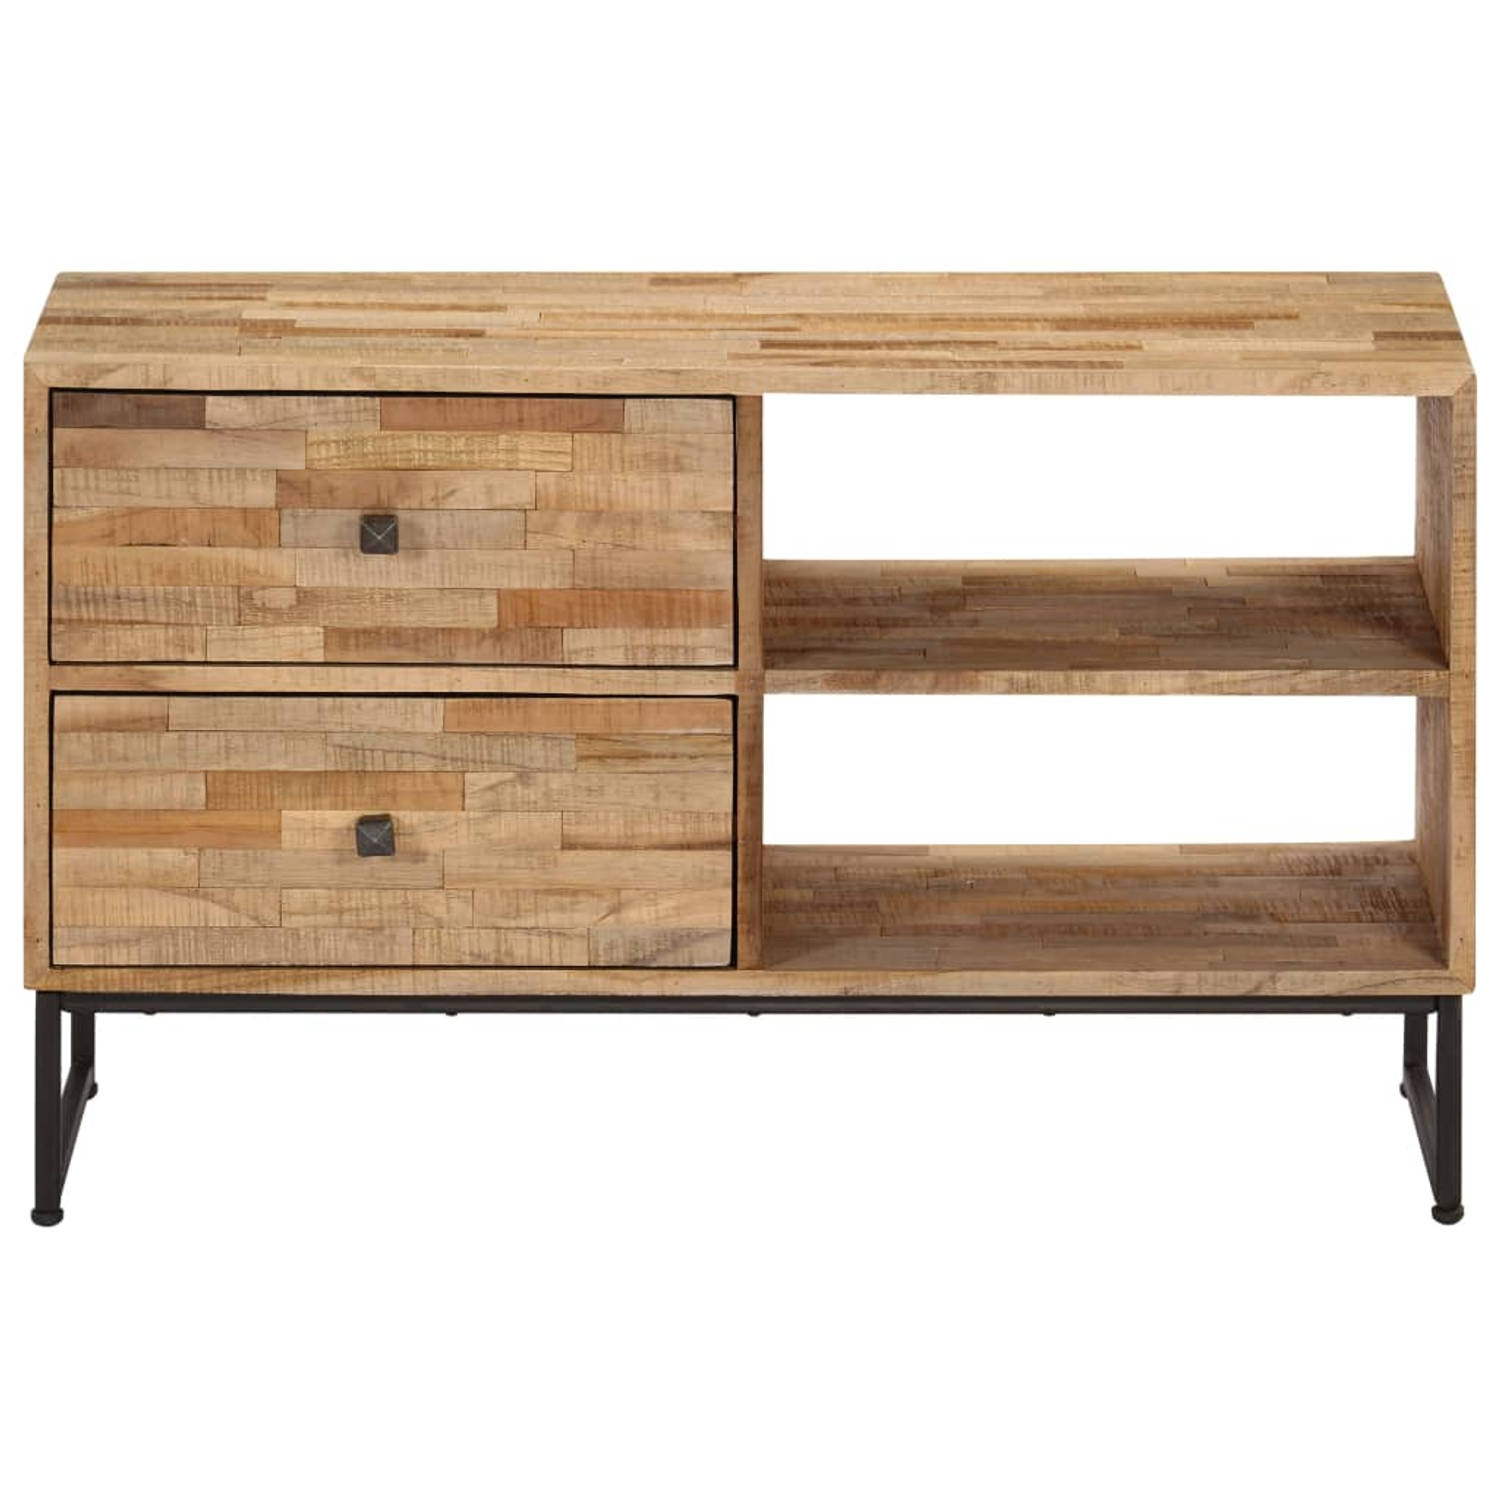 The Living Store Tv-meubel 90x30x55 cm gerecycled teakhout - Kast